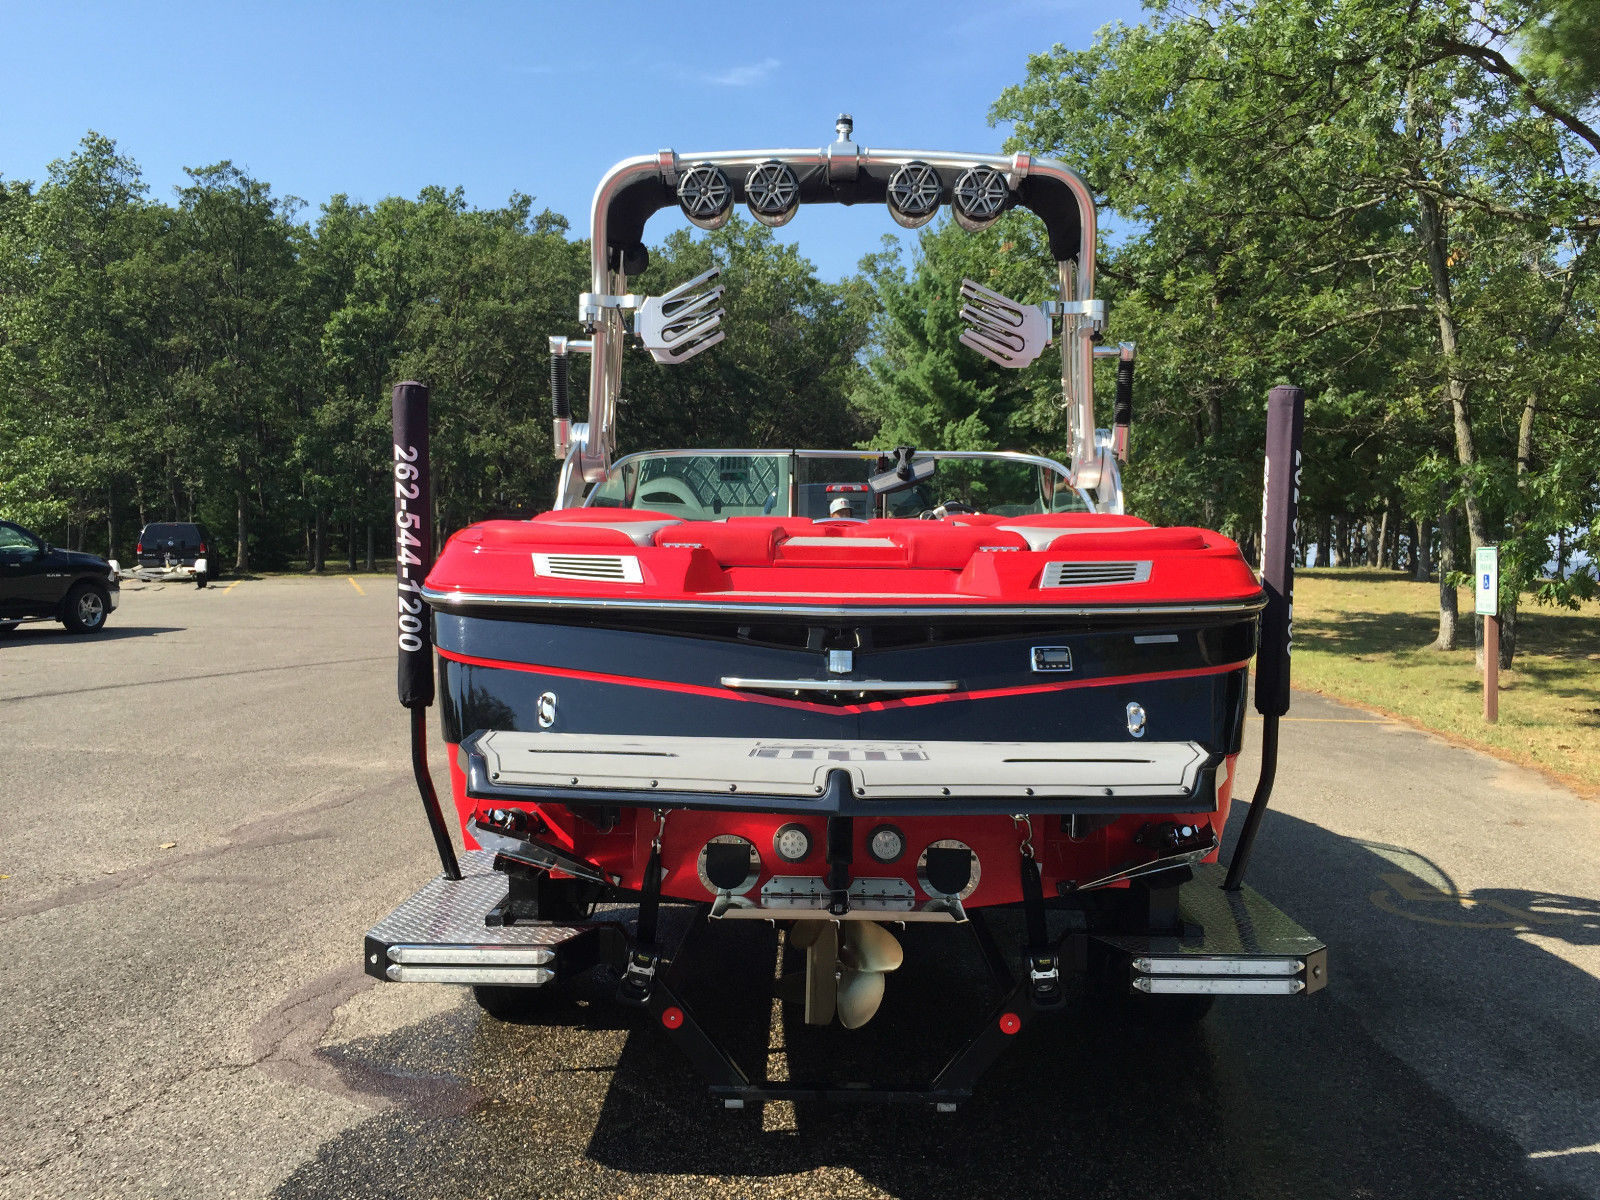 Mastercraft X10 2014 for sale for $70,000 - Boats-from-USA.com